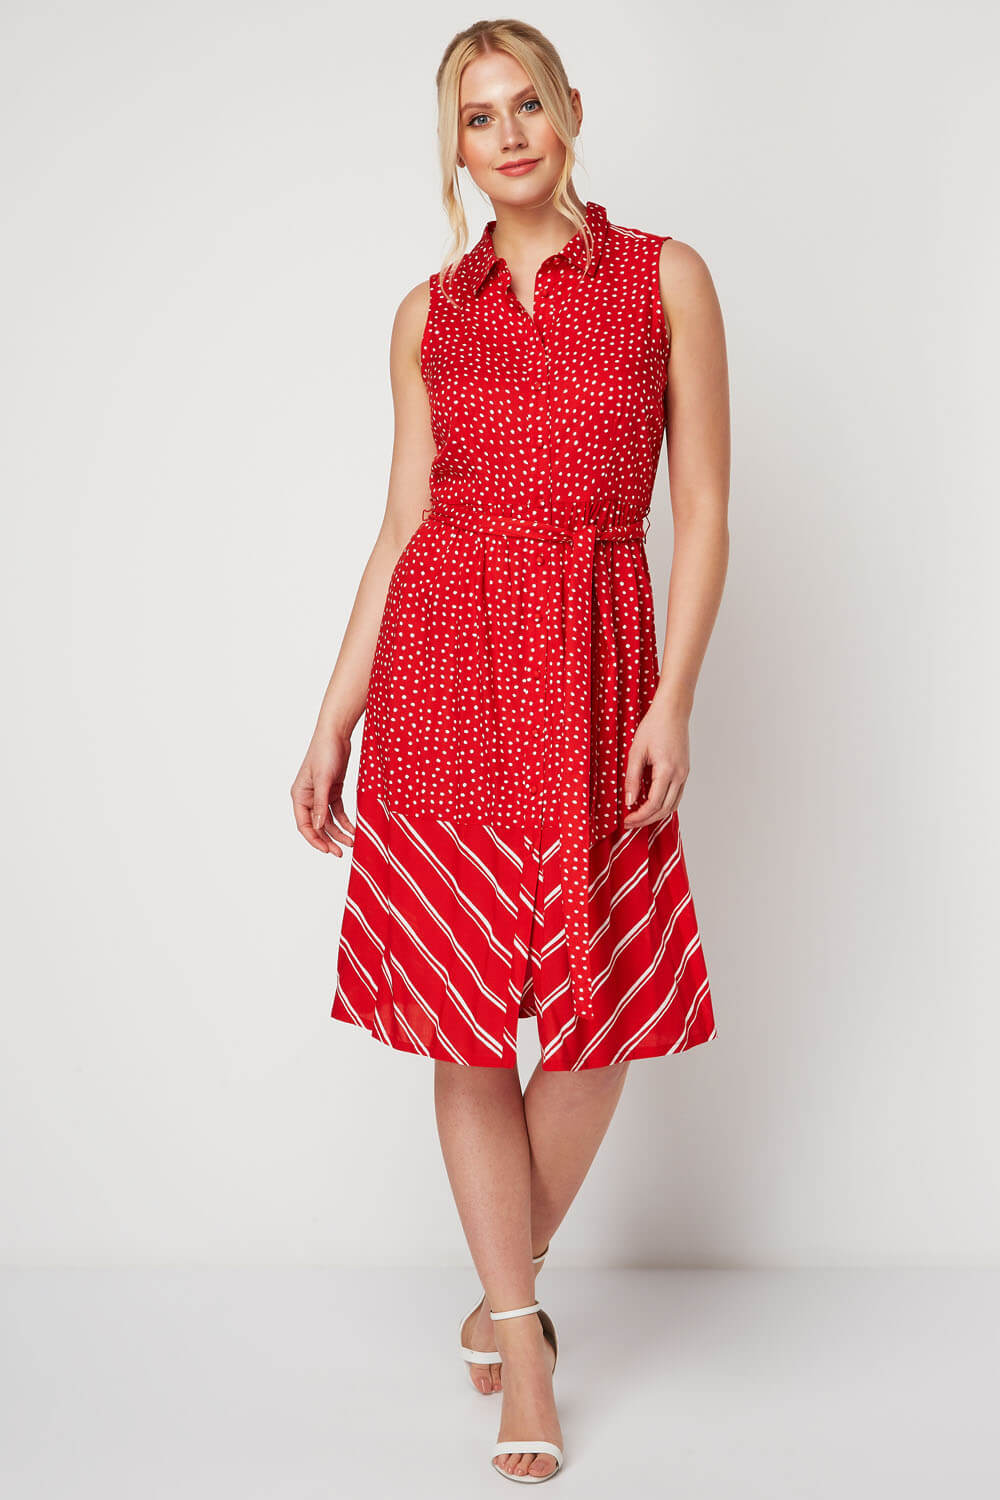 Red Contrast Print Shirt Dress, Image 2 of 5